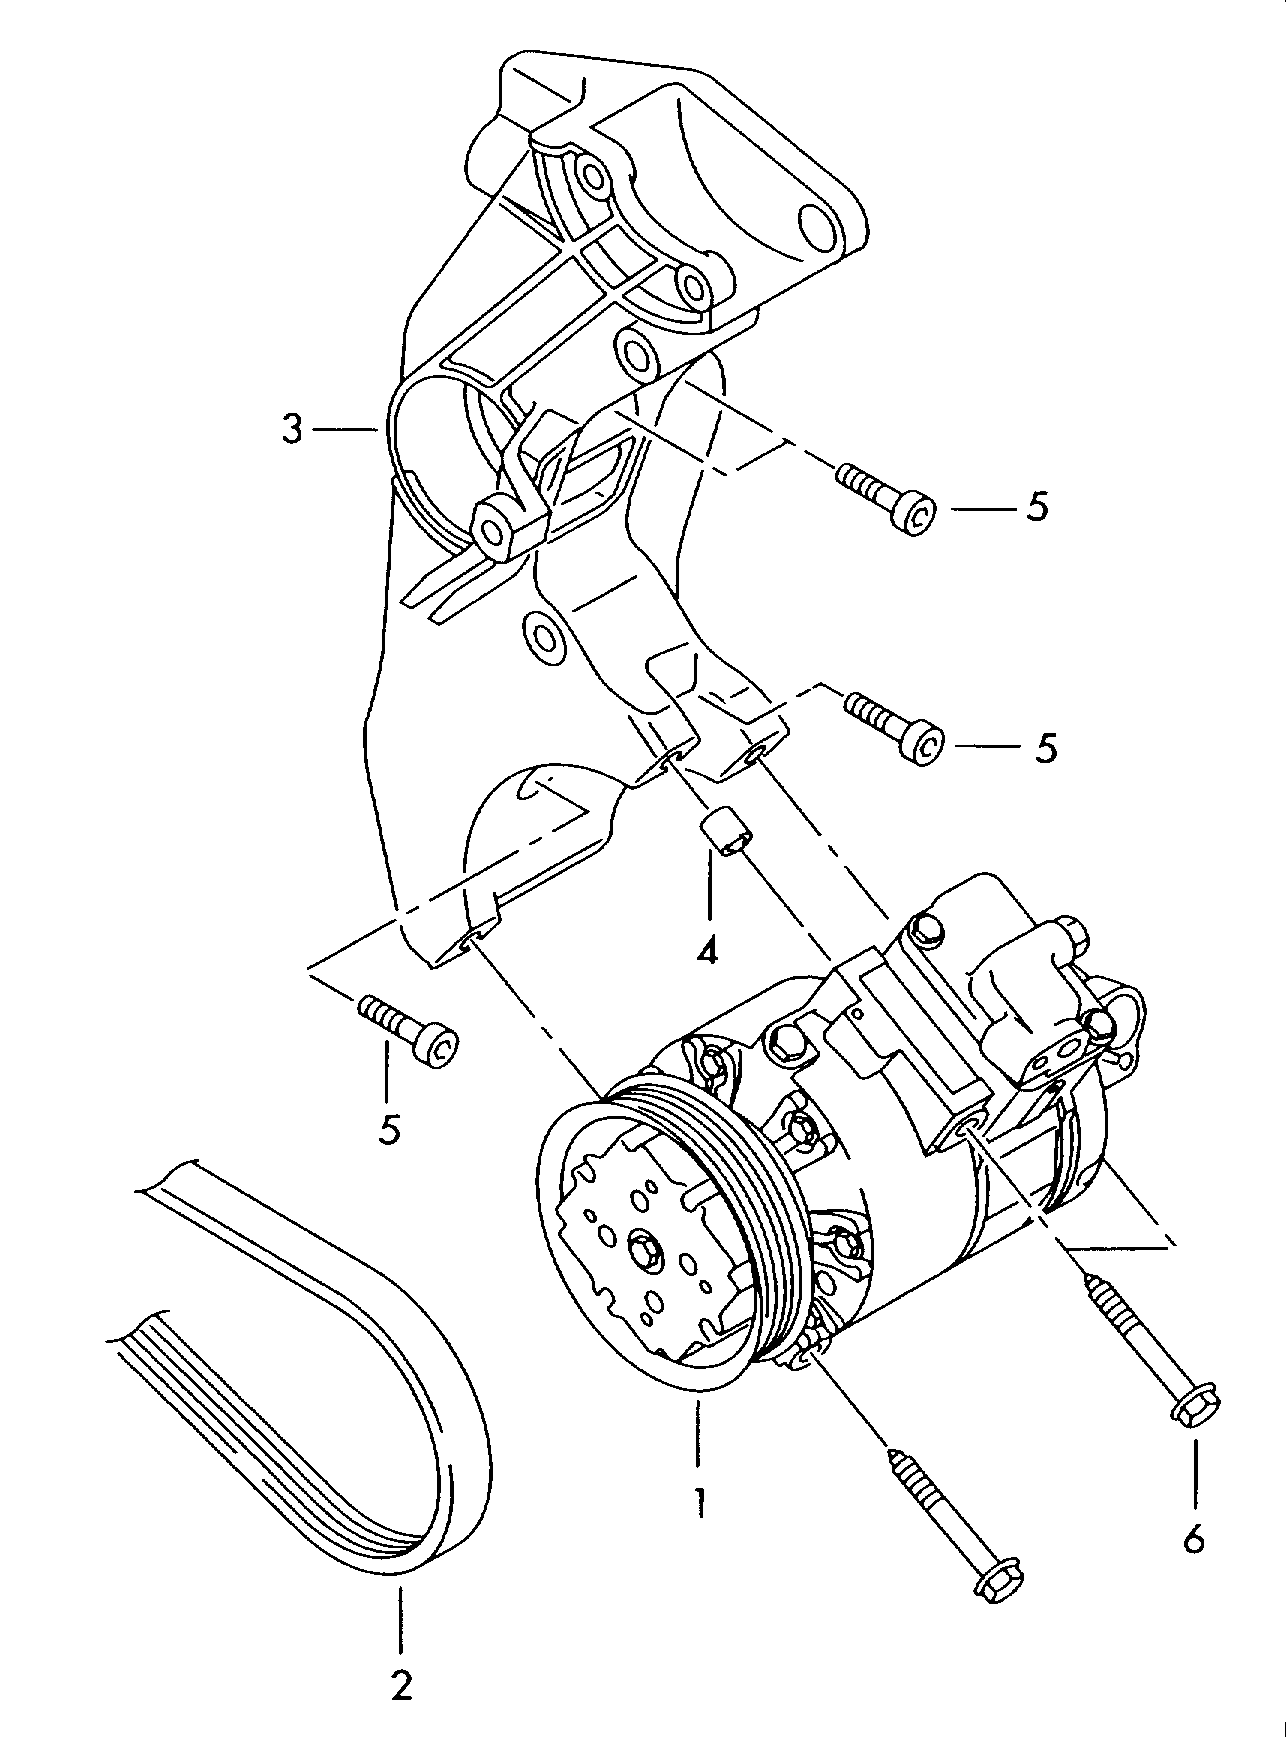 a/c compressor; connecting and mounting parts
for... - Golf/Variant/4Motion(GOLF)  